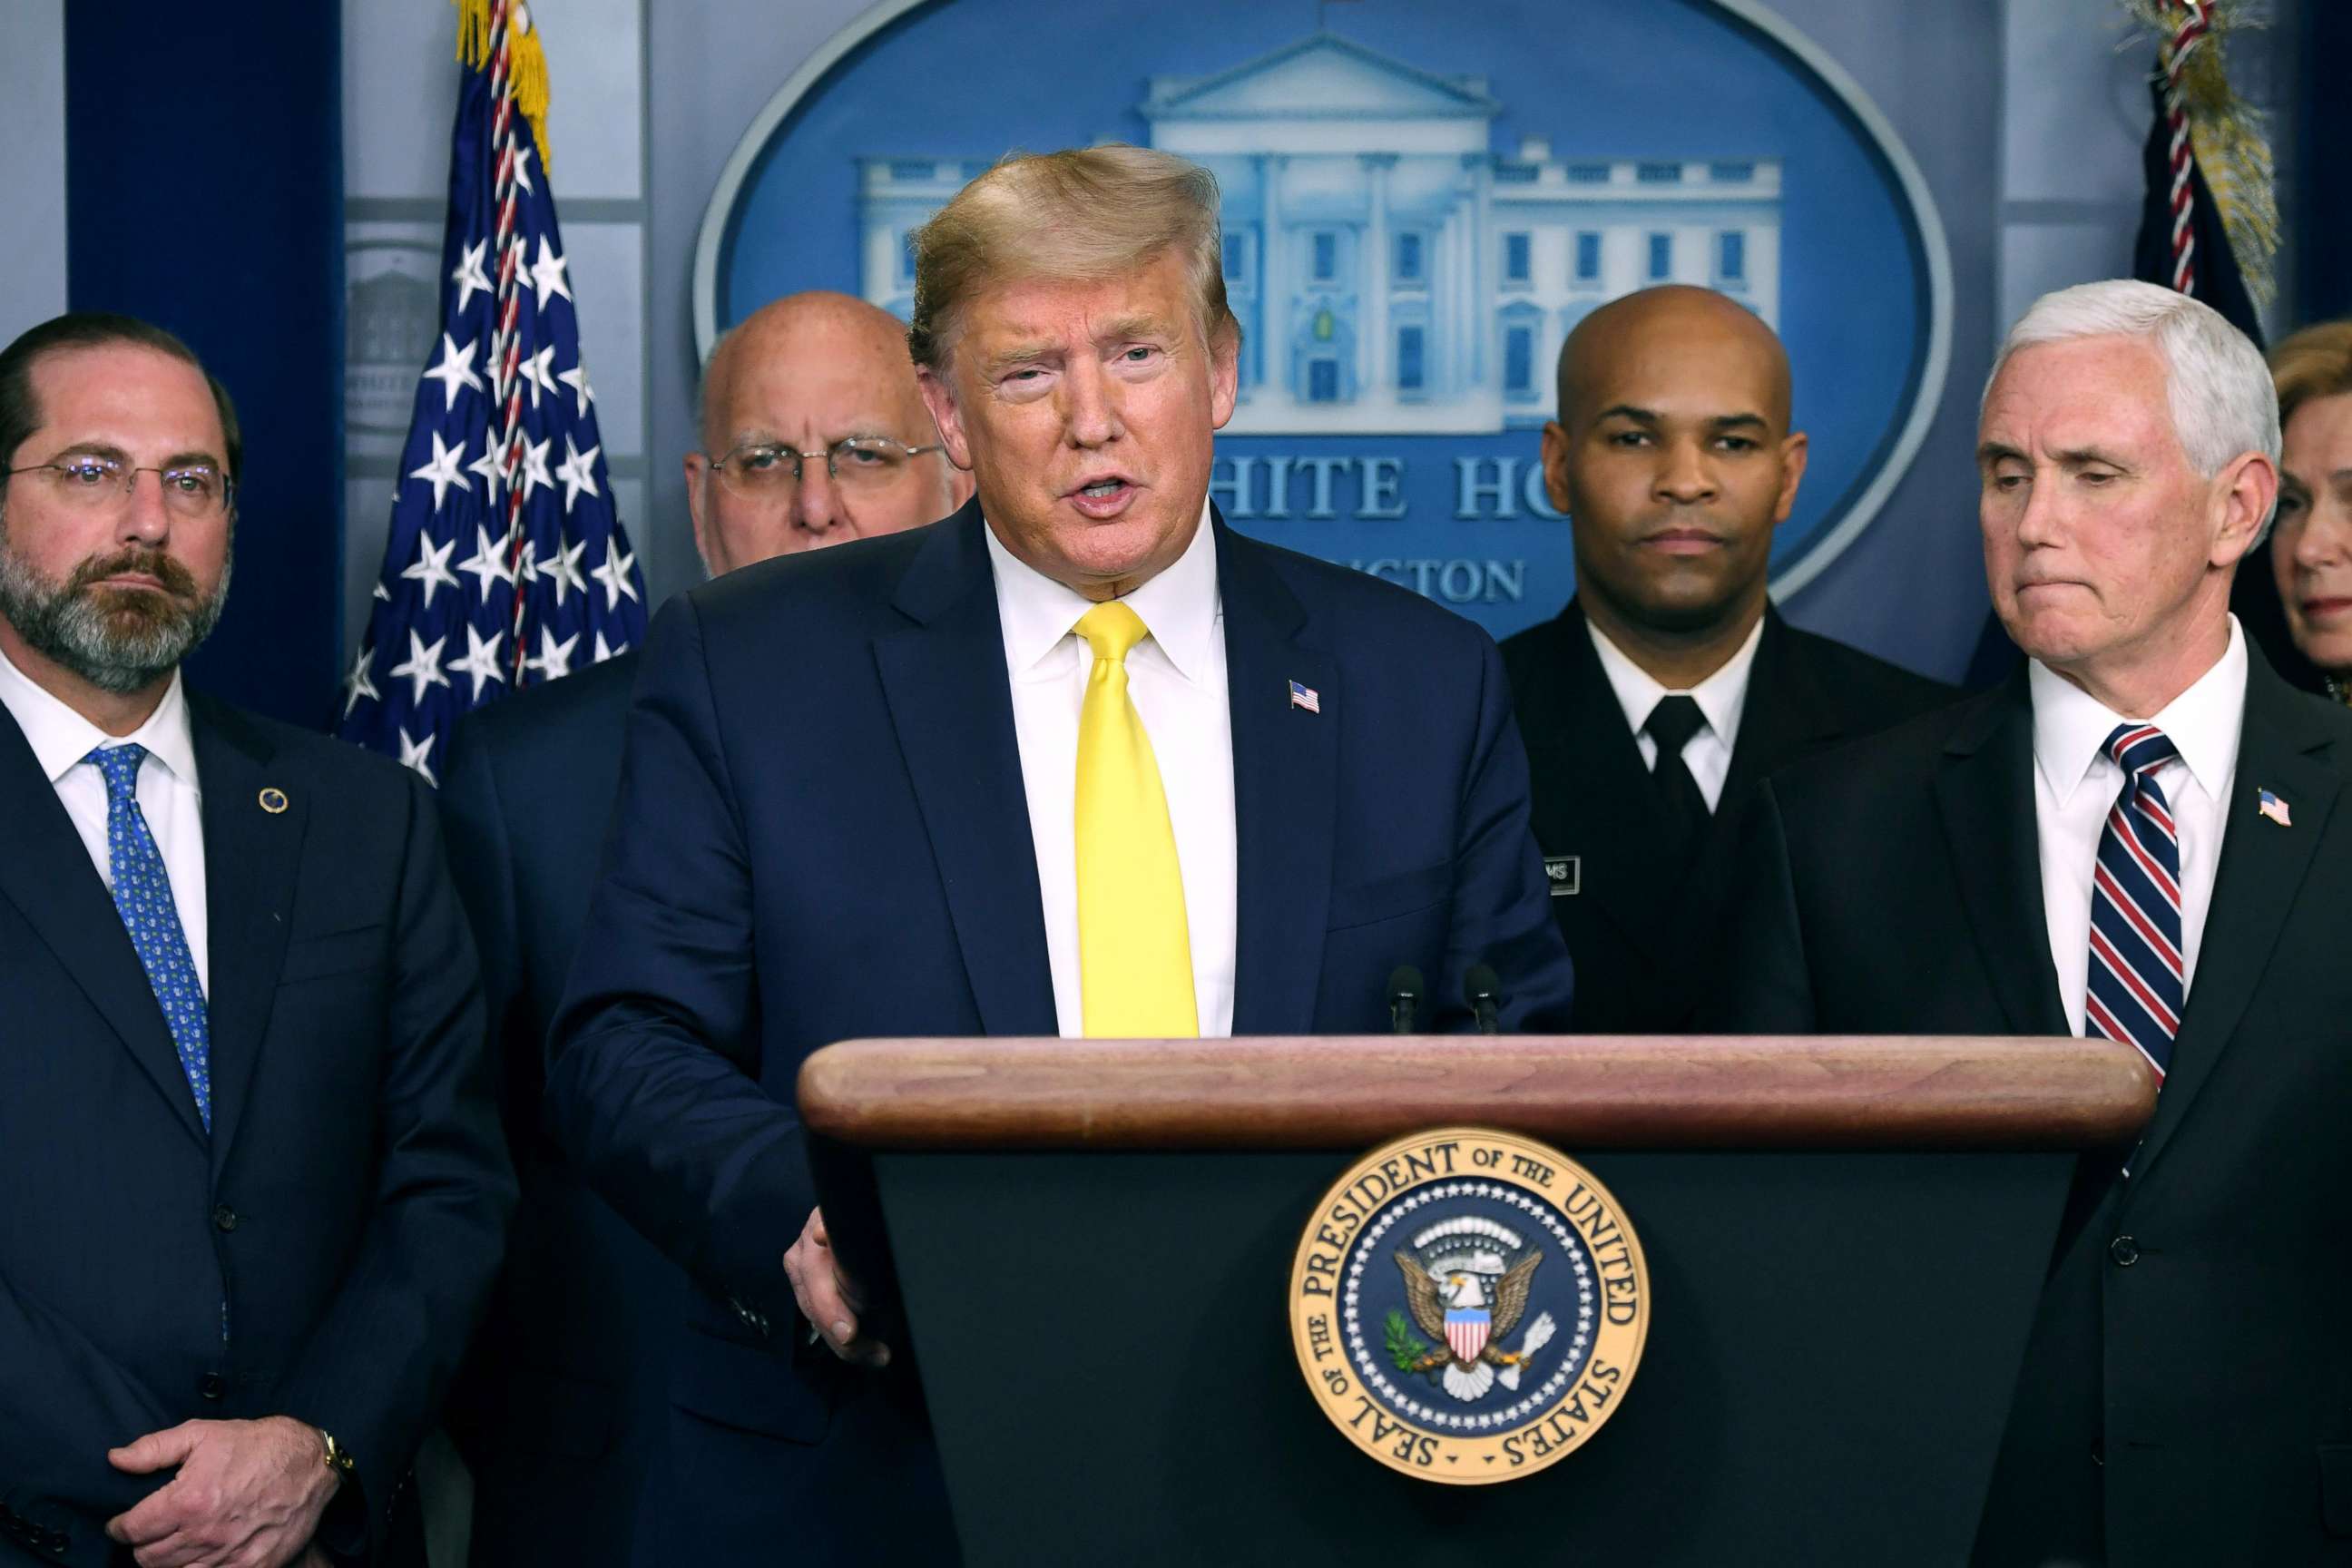 PHOTO: President Donald Trump speaks about COVID-19 alongside Vice President Mike Pence and members of the Coronavirus Task Force in Washington, March 9, 2020.